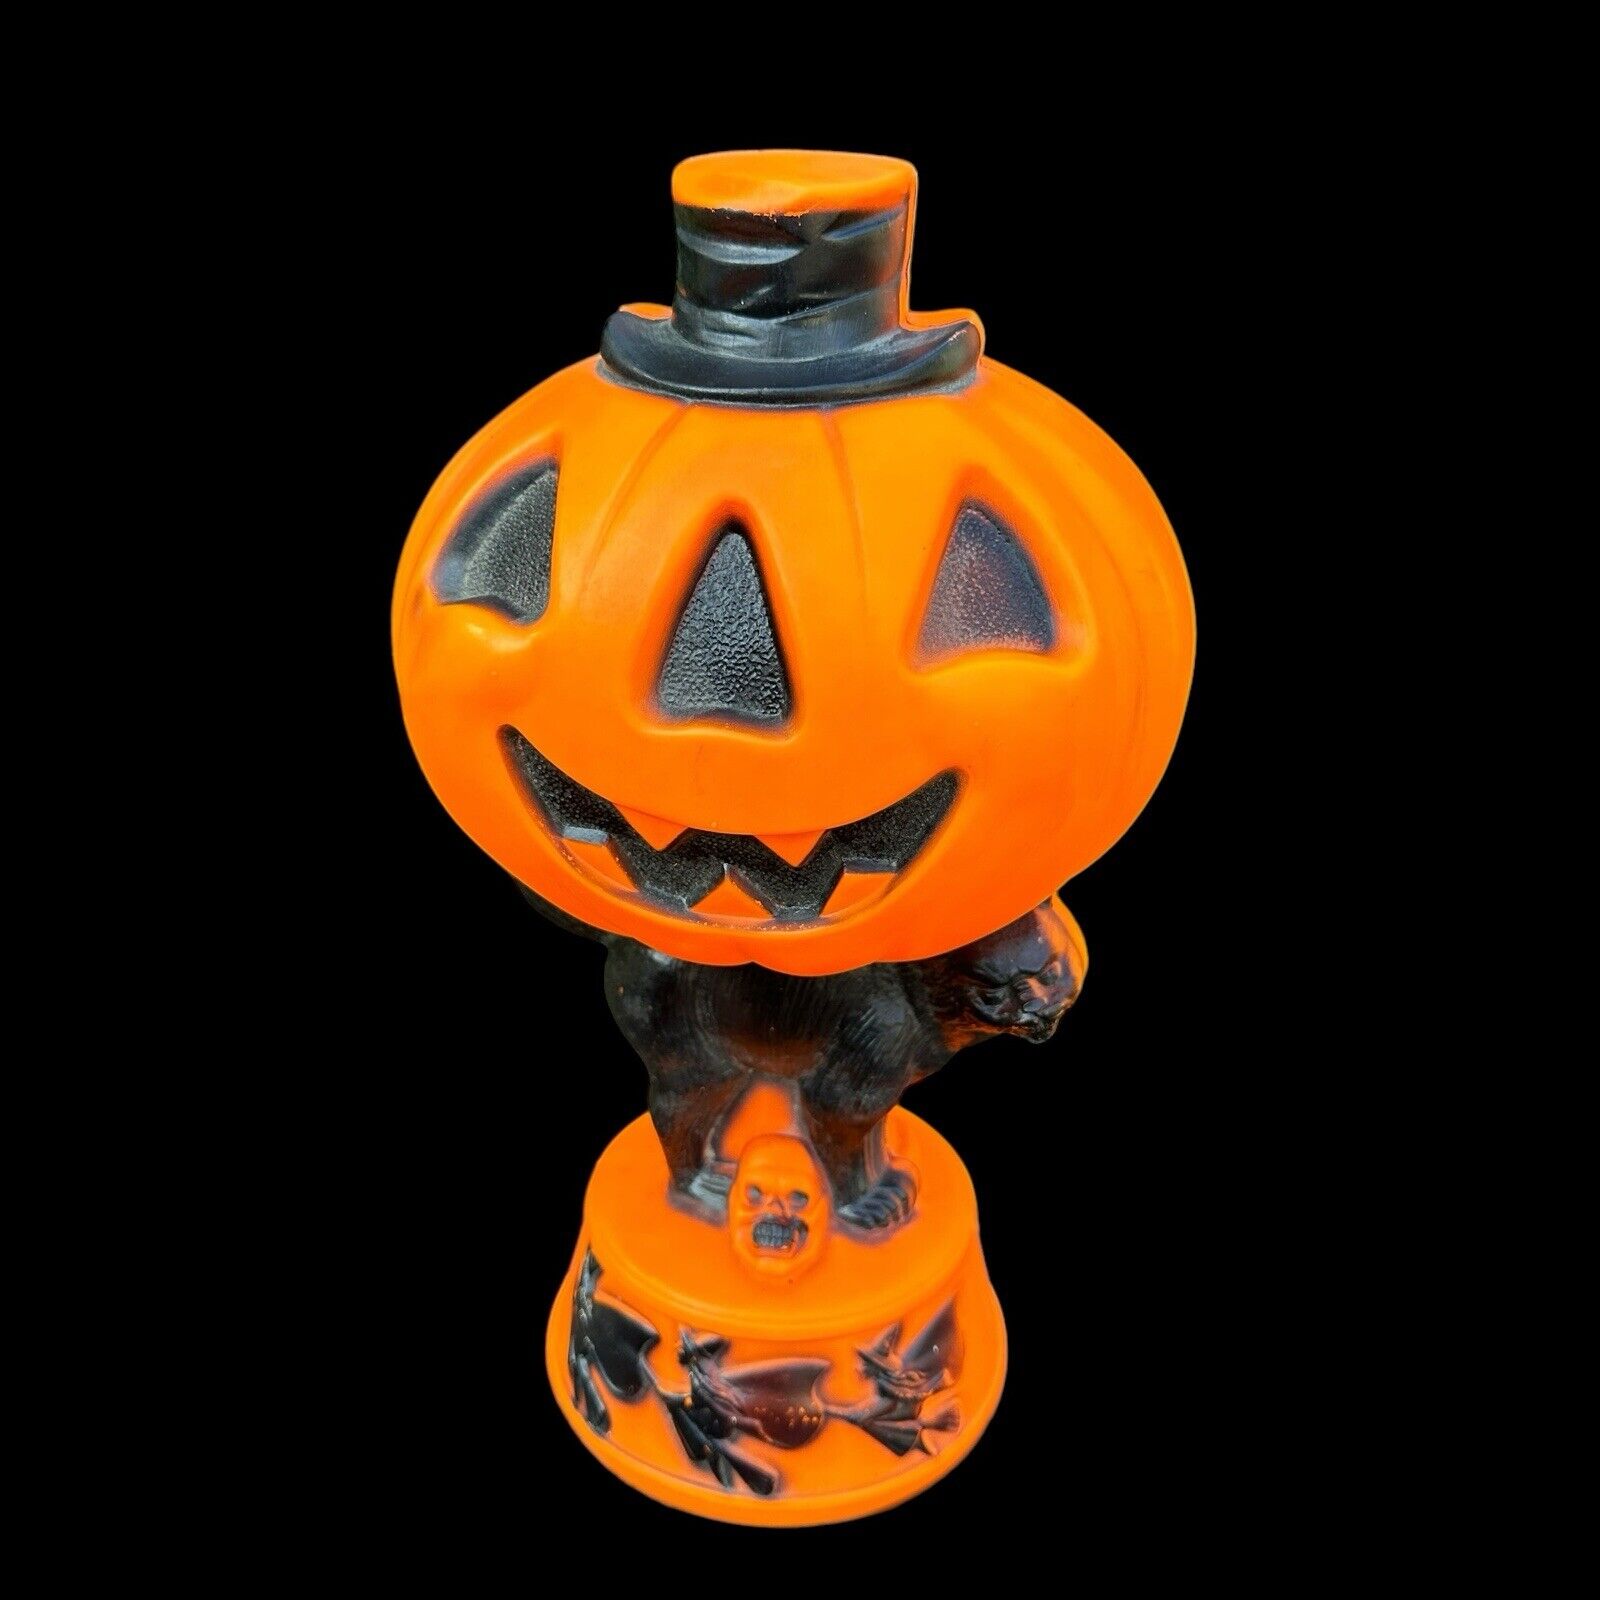 Vintage Empire Halloween Blow Mold Lighted Pumpkin Black Cat Witches Skull 14